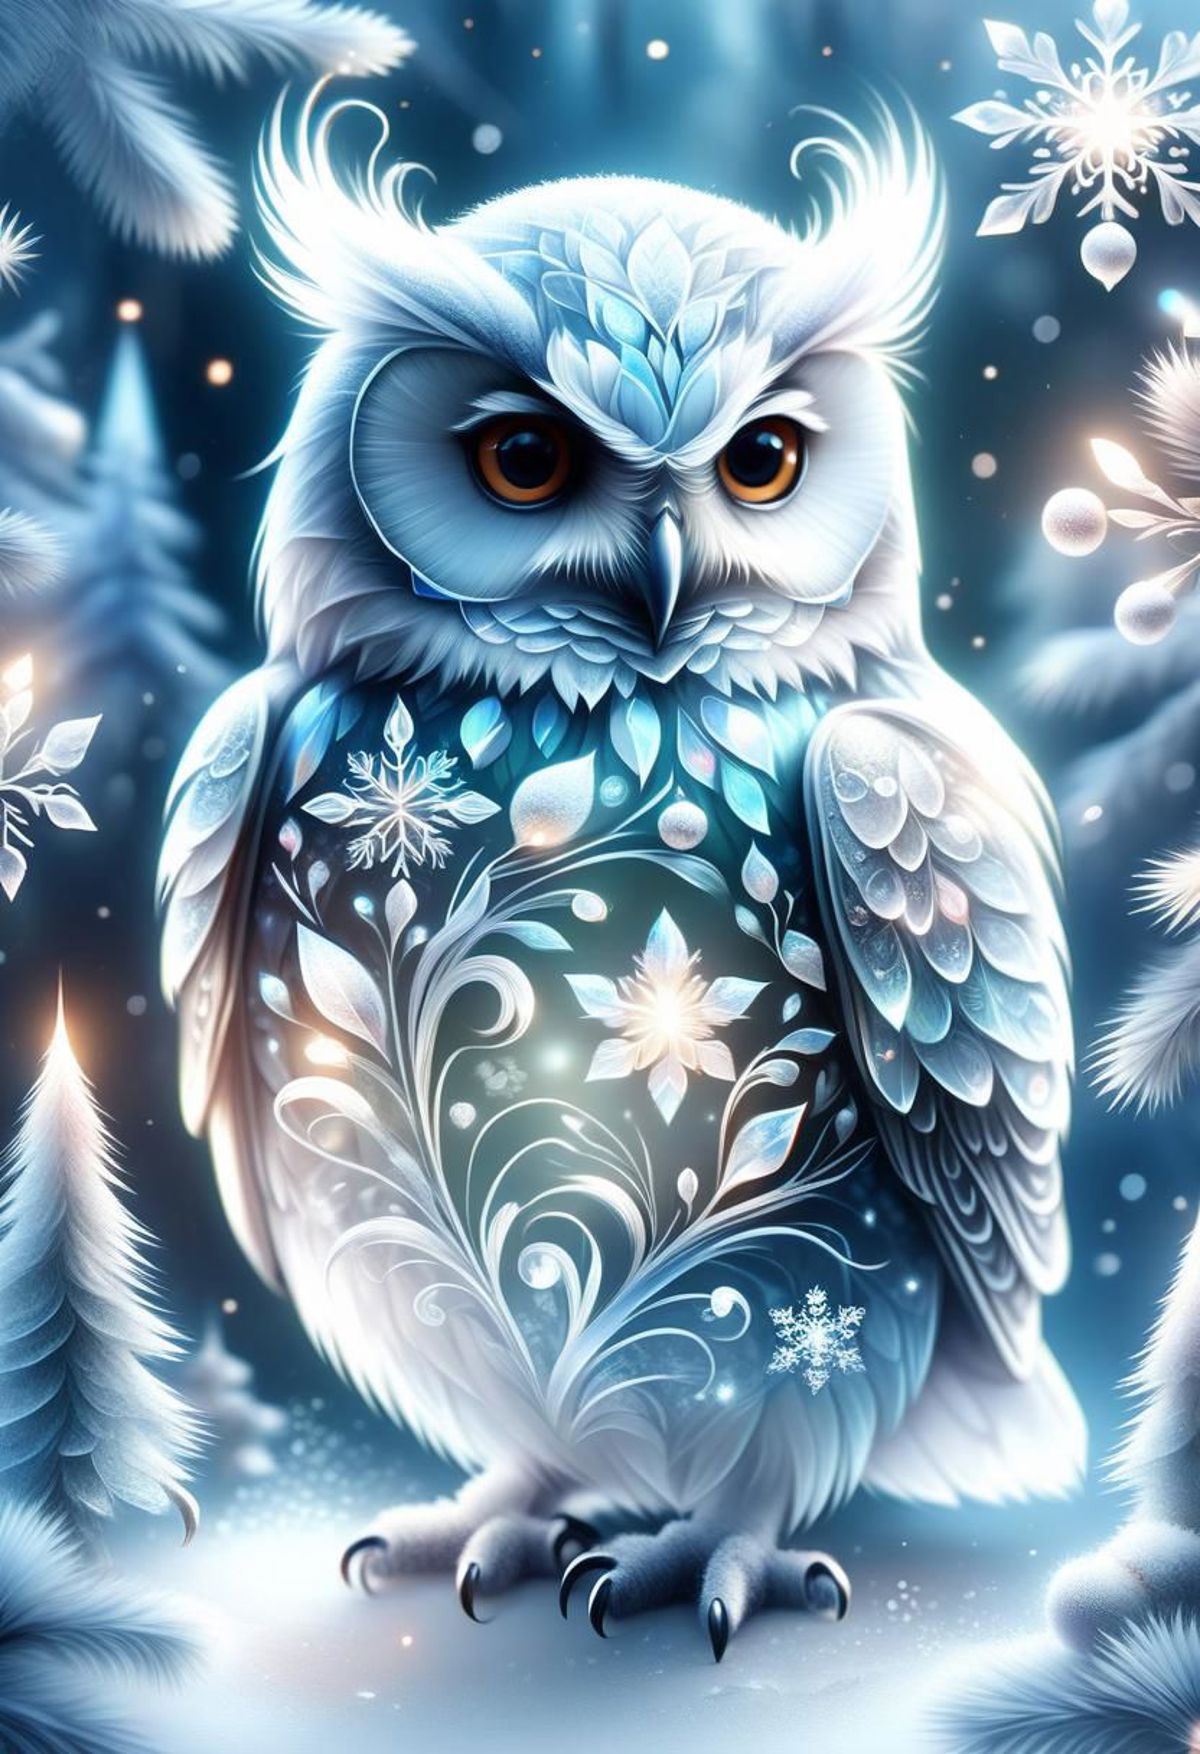 A snowy scene with a beautifully decorated owl.